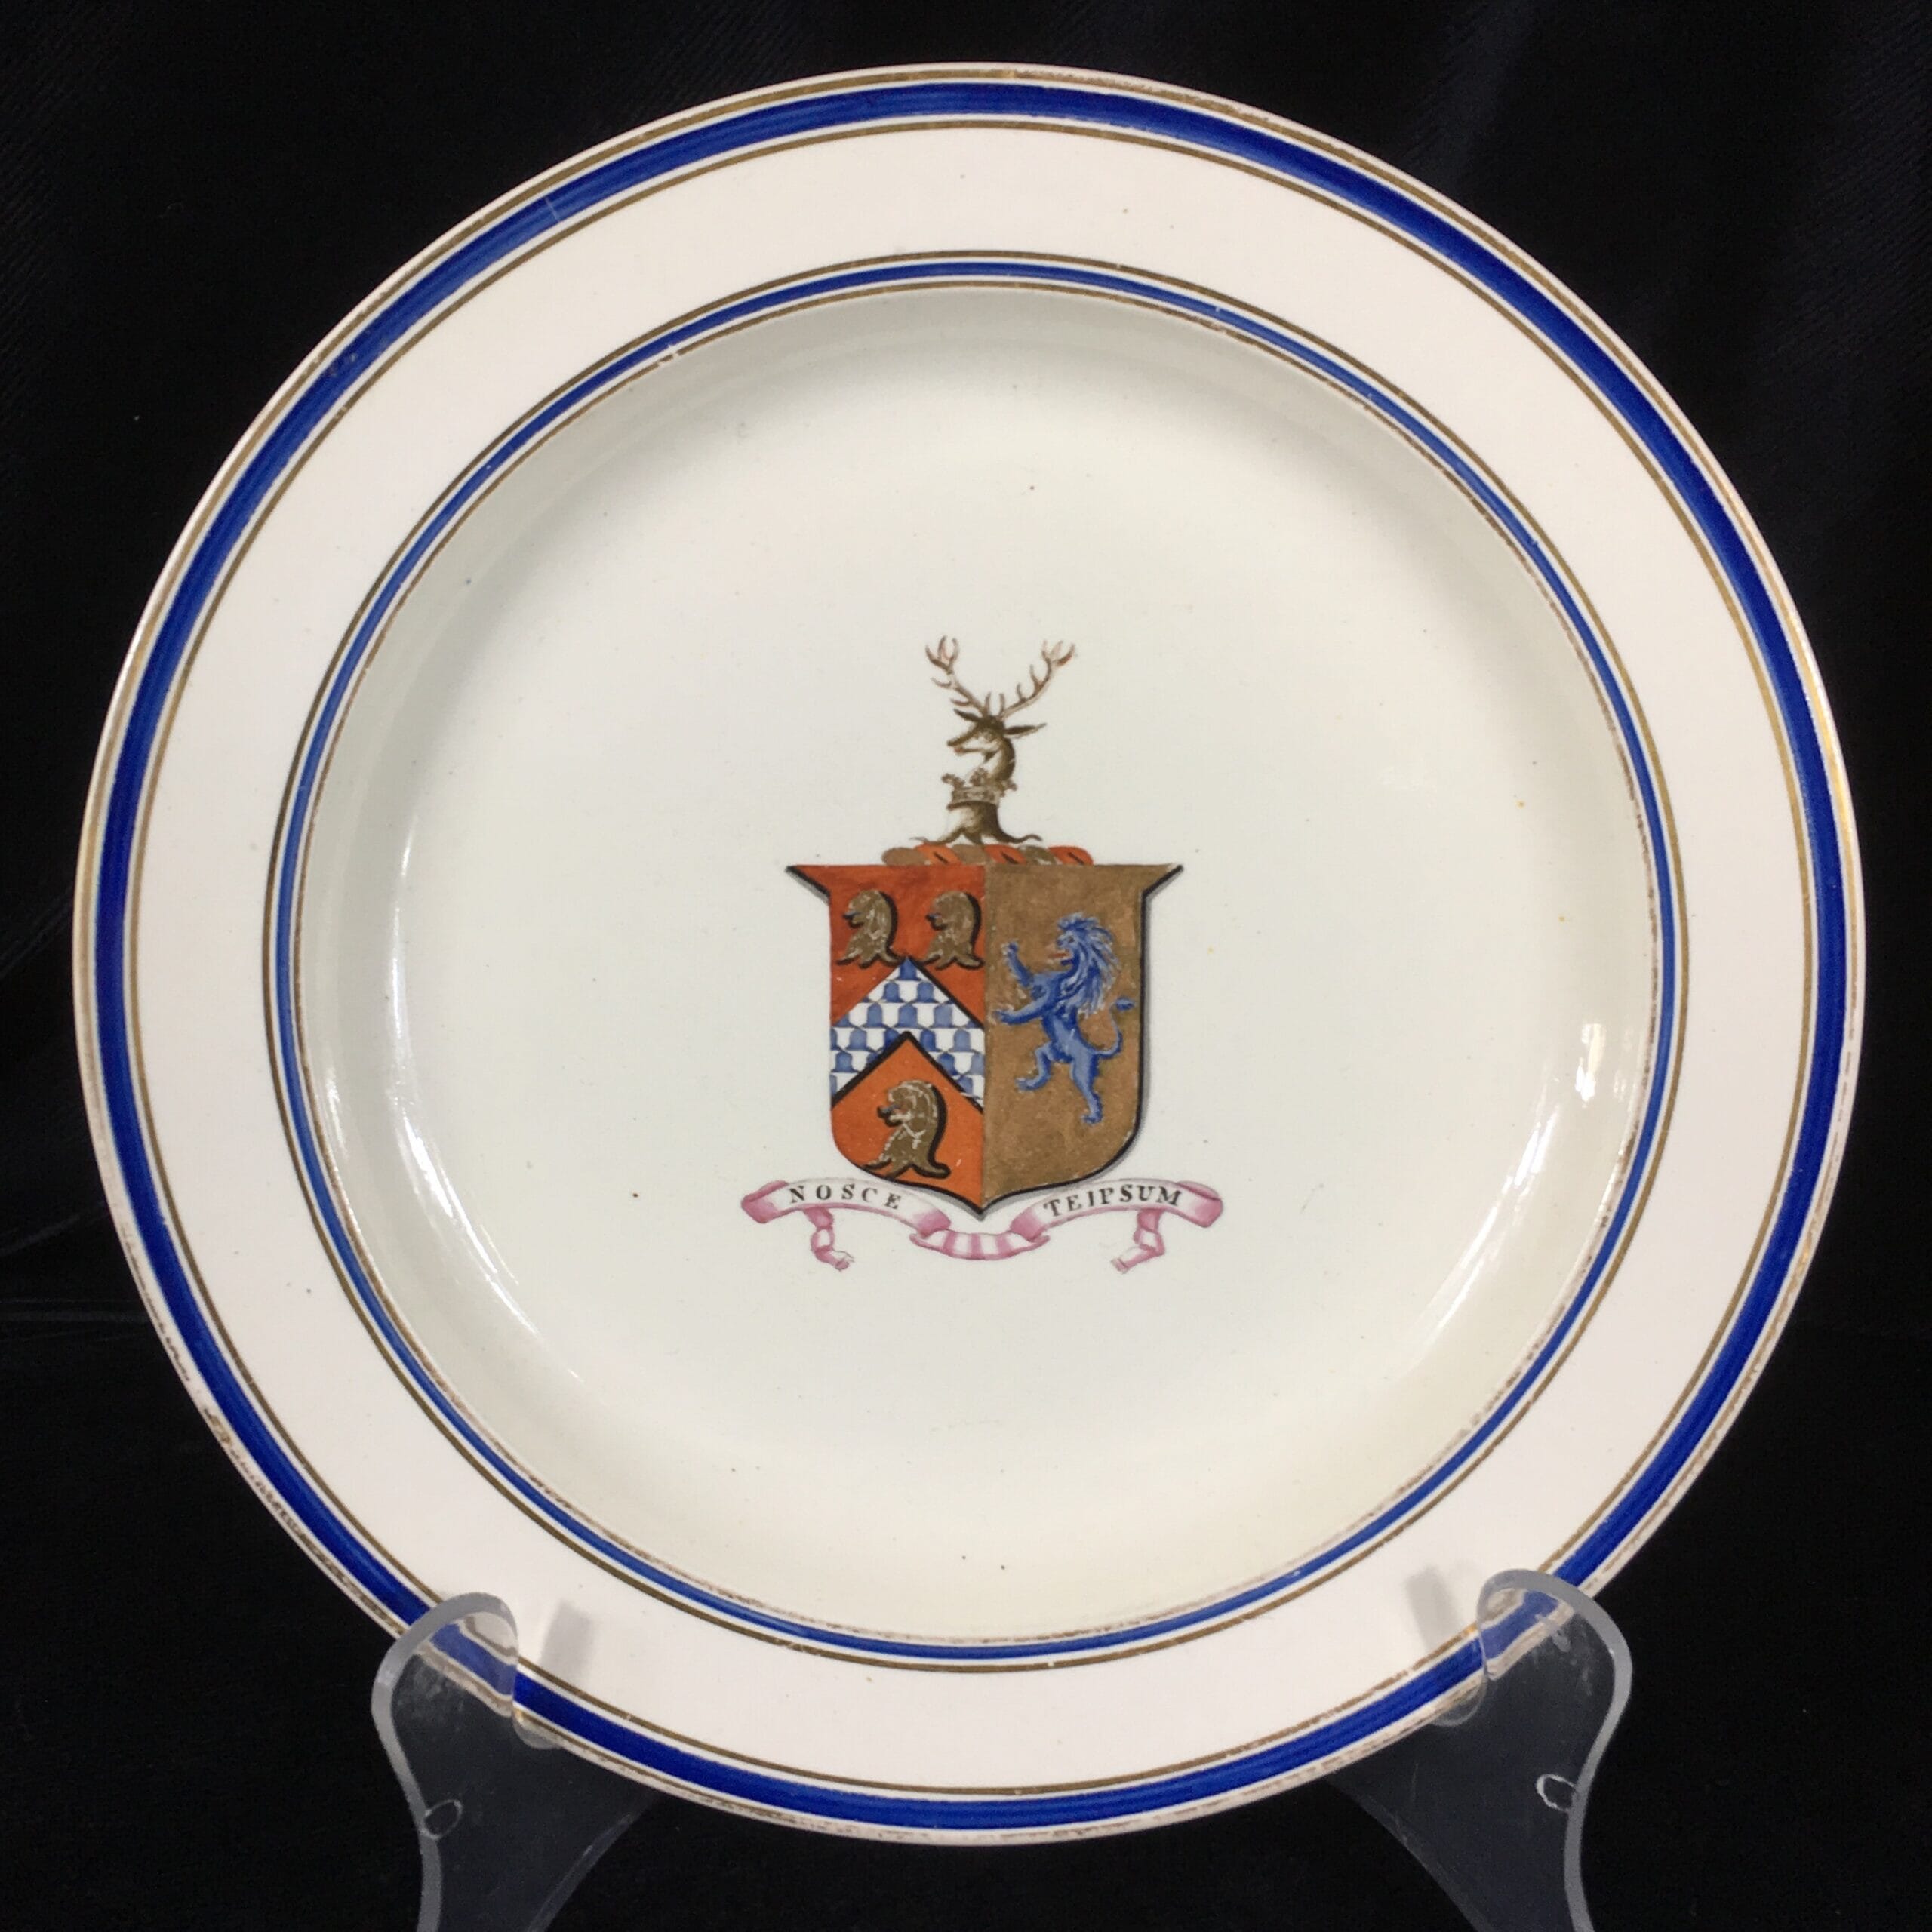 Wedgwood creamware armorial plate, Samuel Isted service, c.1795-0